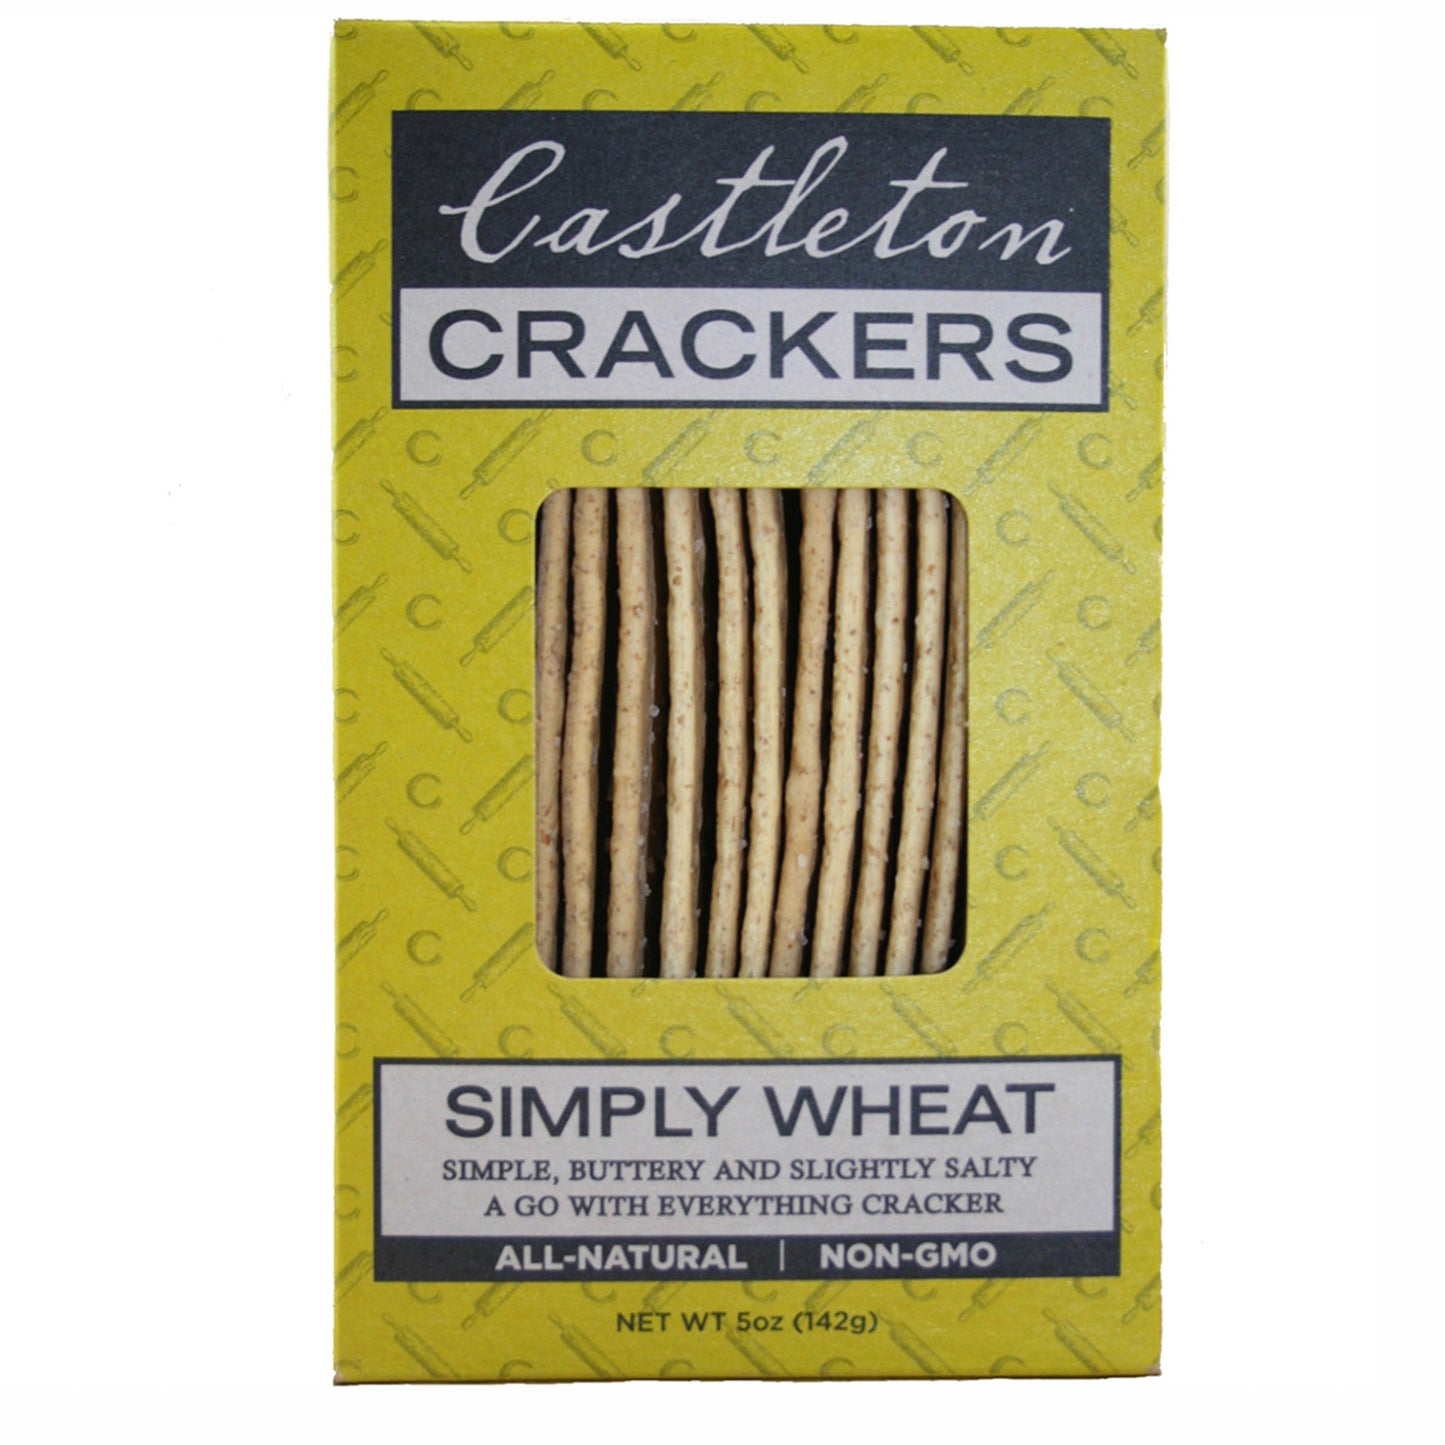 Castleton Crackers' Simply Wheat